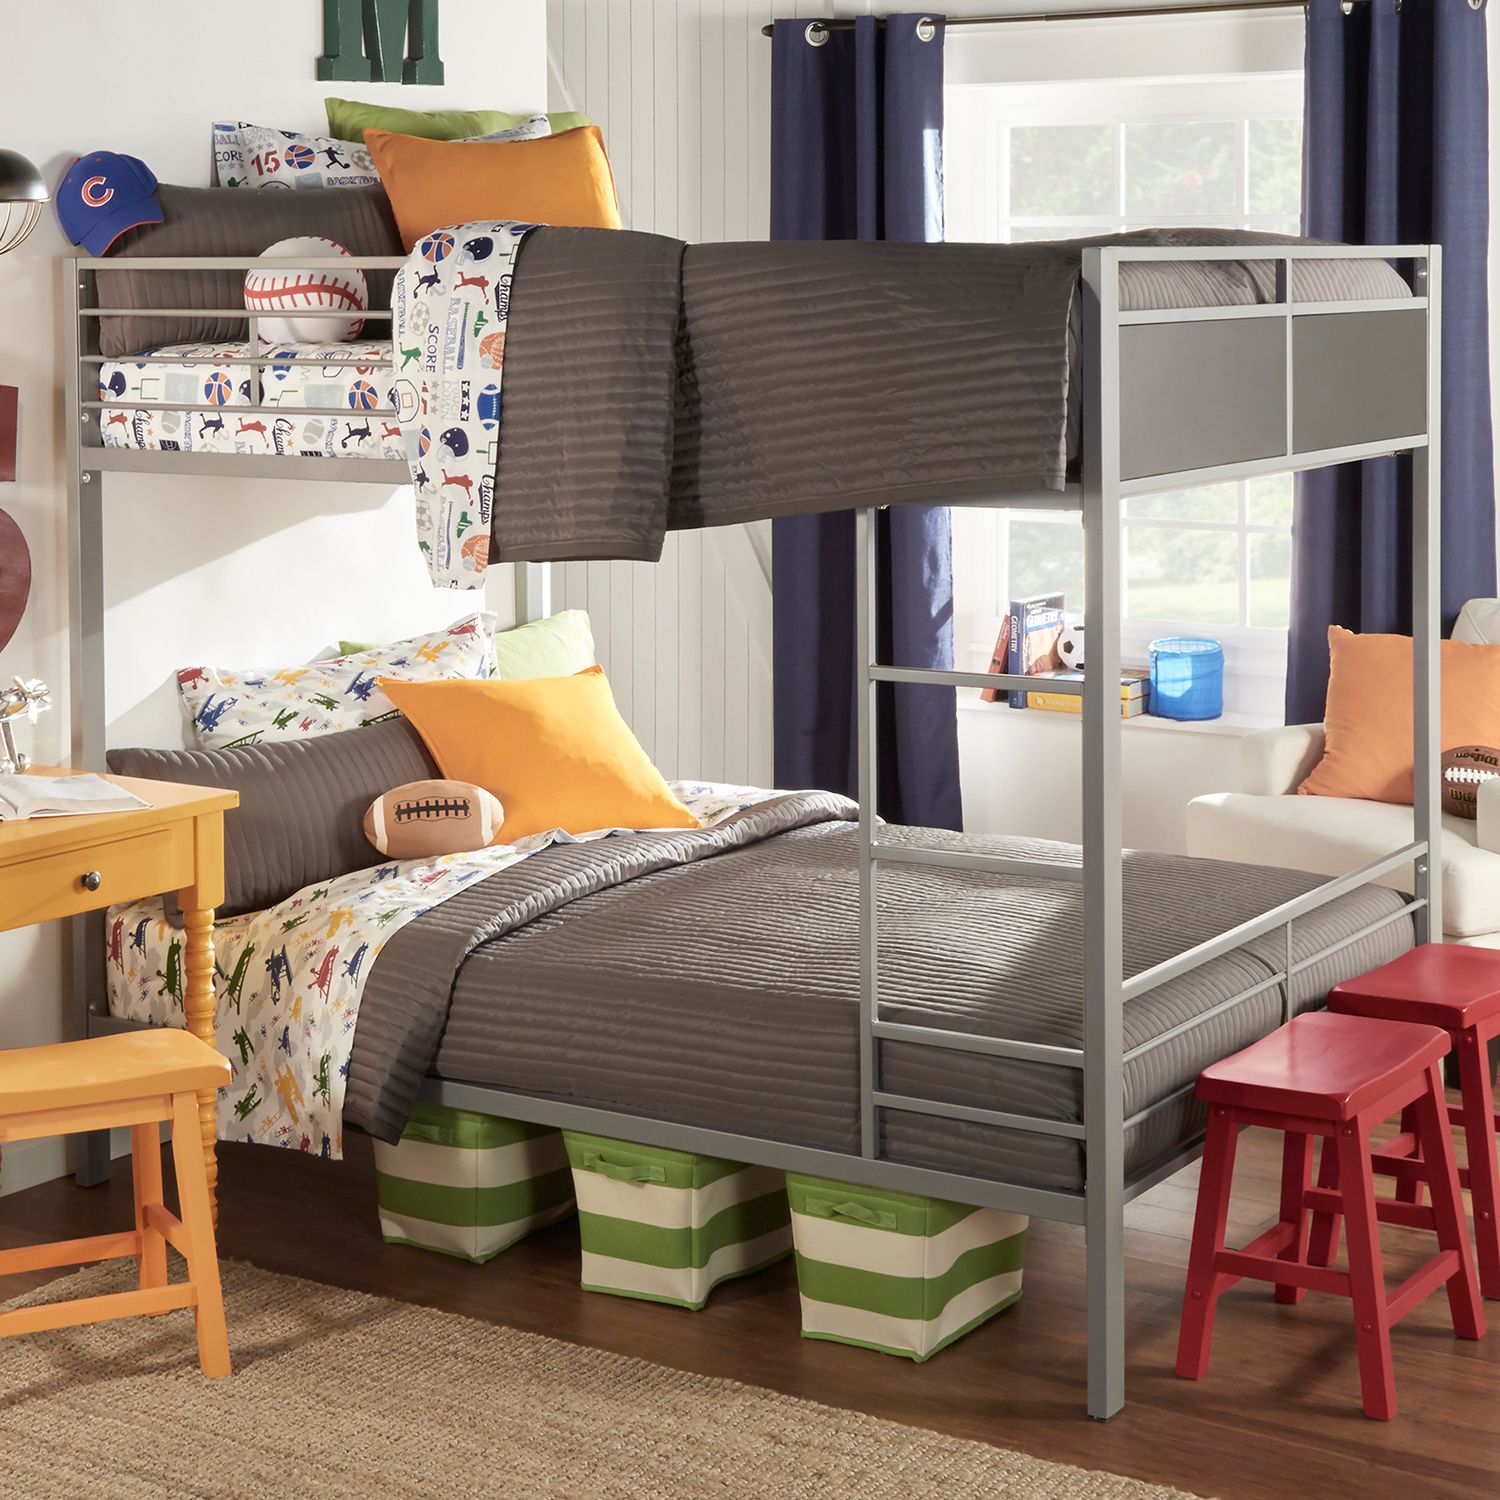 Image for HomeVance Bevin Bunk Bed at Kohl's.